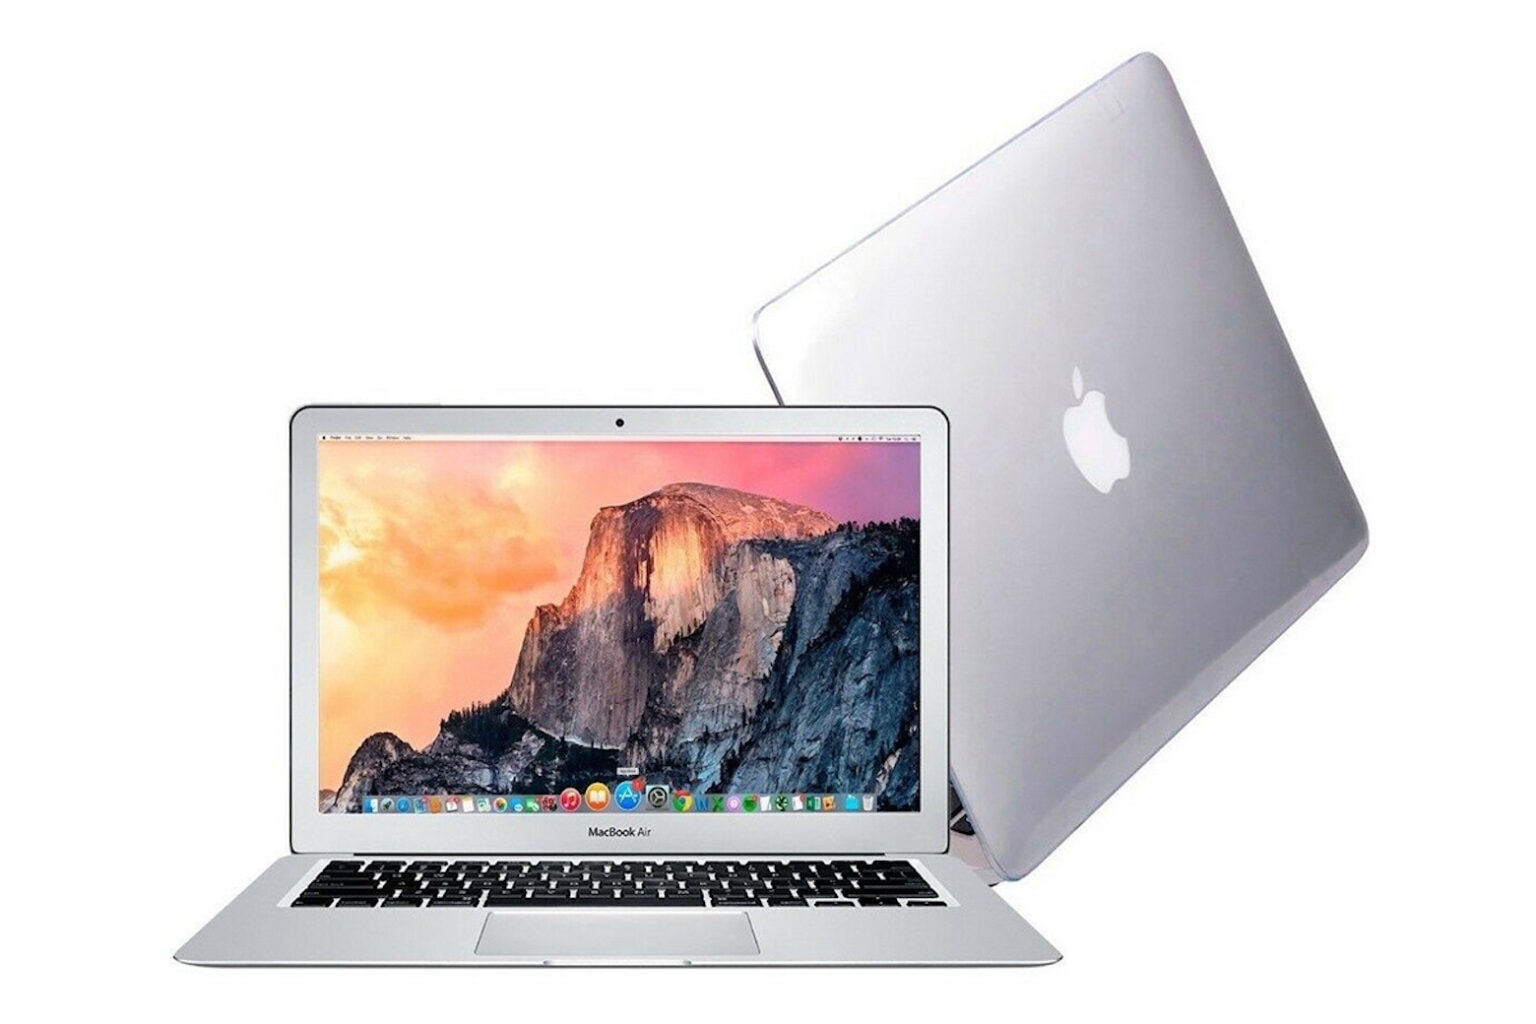 Spend only $389.99 on a powerful MacBook Air featuring 128GB of storage.